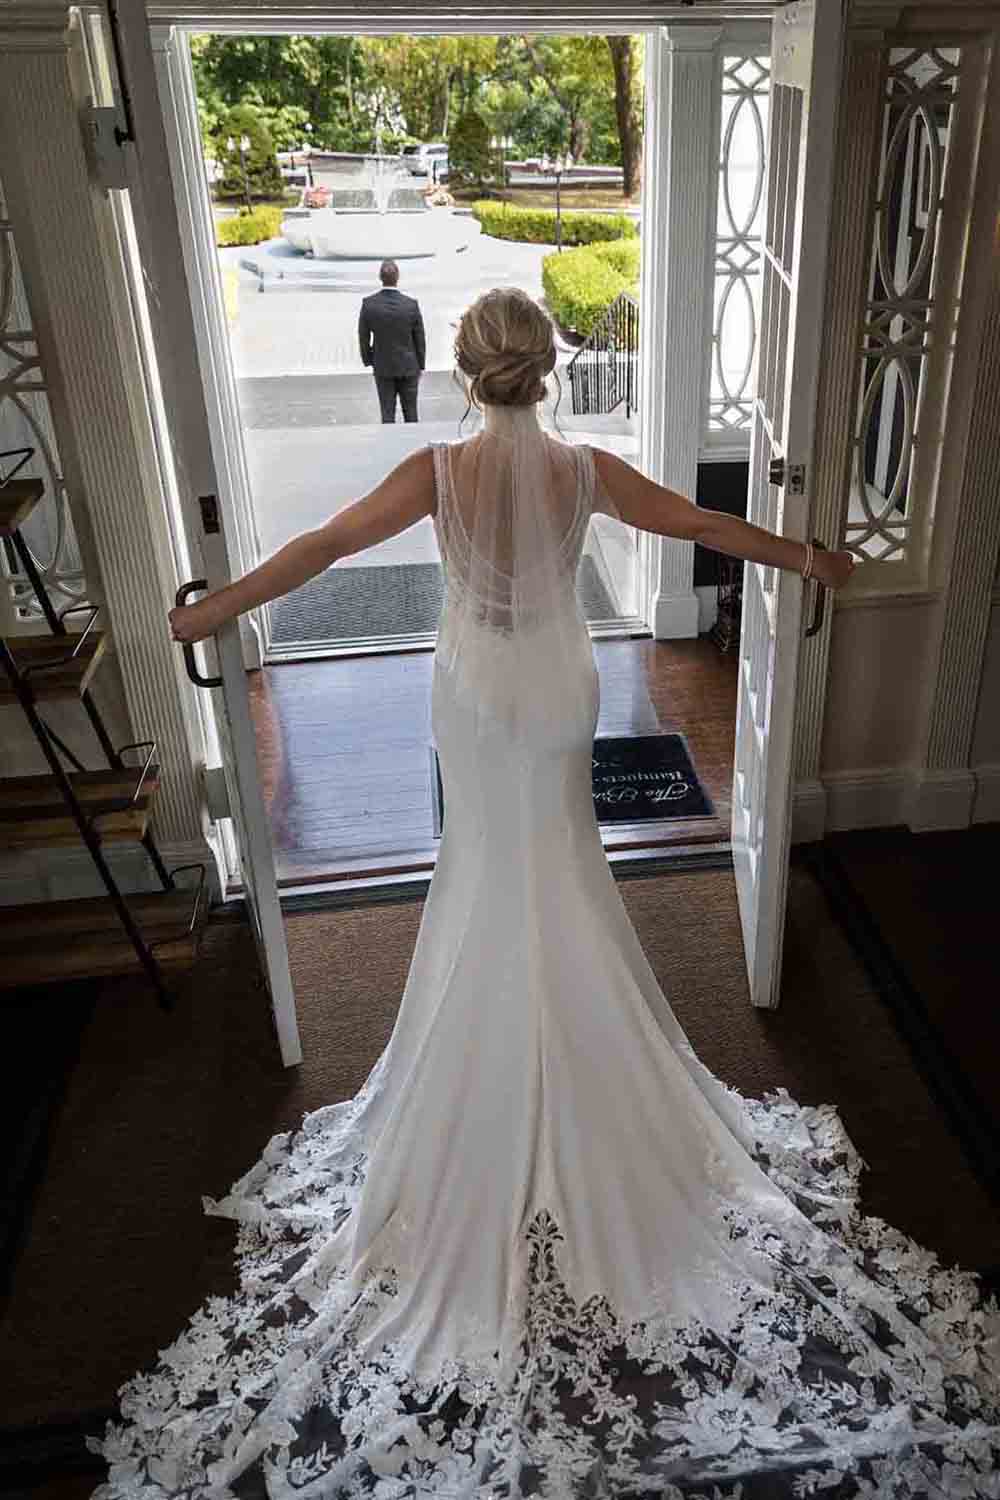 Bride wearing white dress with long train holding French doors open at a Briarcliff Manor wedding